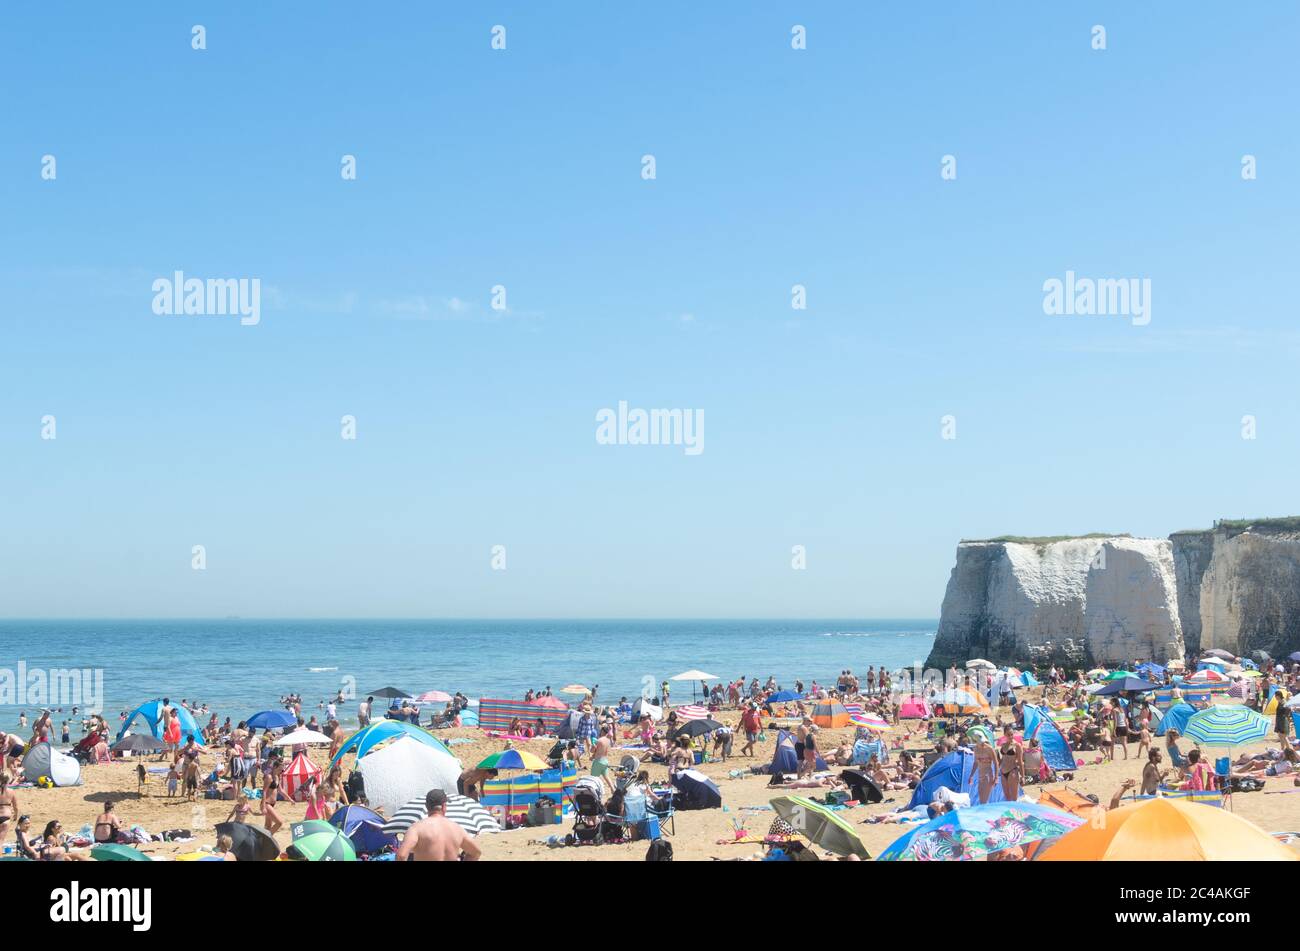 Broadstairs, Kent, England  - Despite lockdown restrictions due to the Coronavirus, crowds gather on the sandy beach on the hottest day of the year Stock Photo